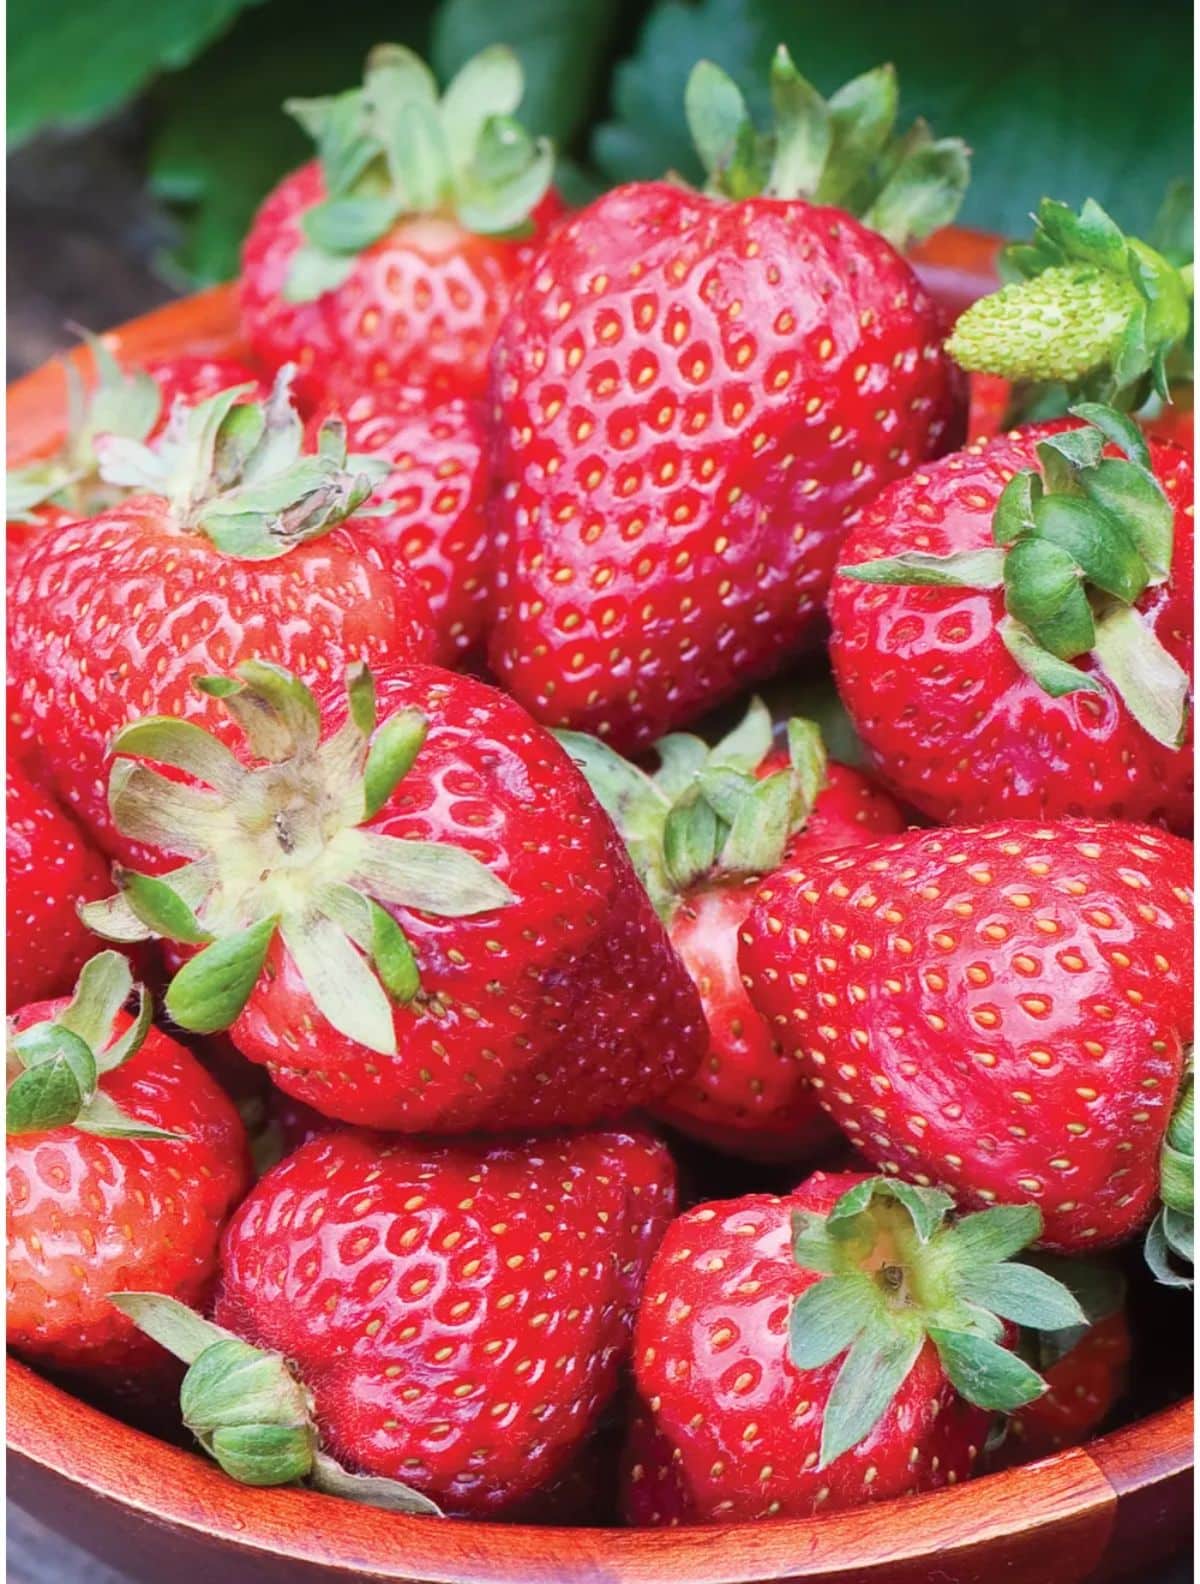 Bowl of ripe seascape strawberry variety fruits.